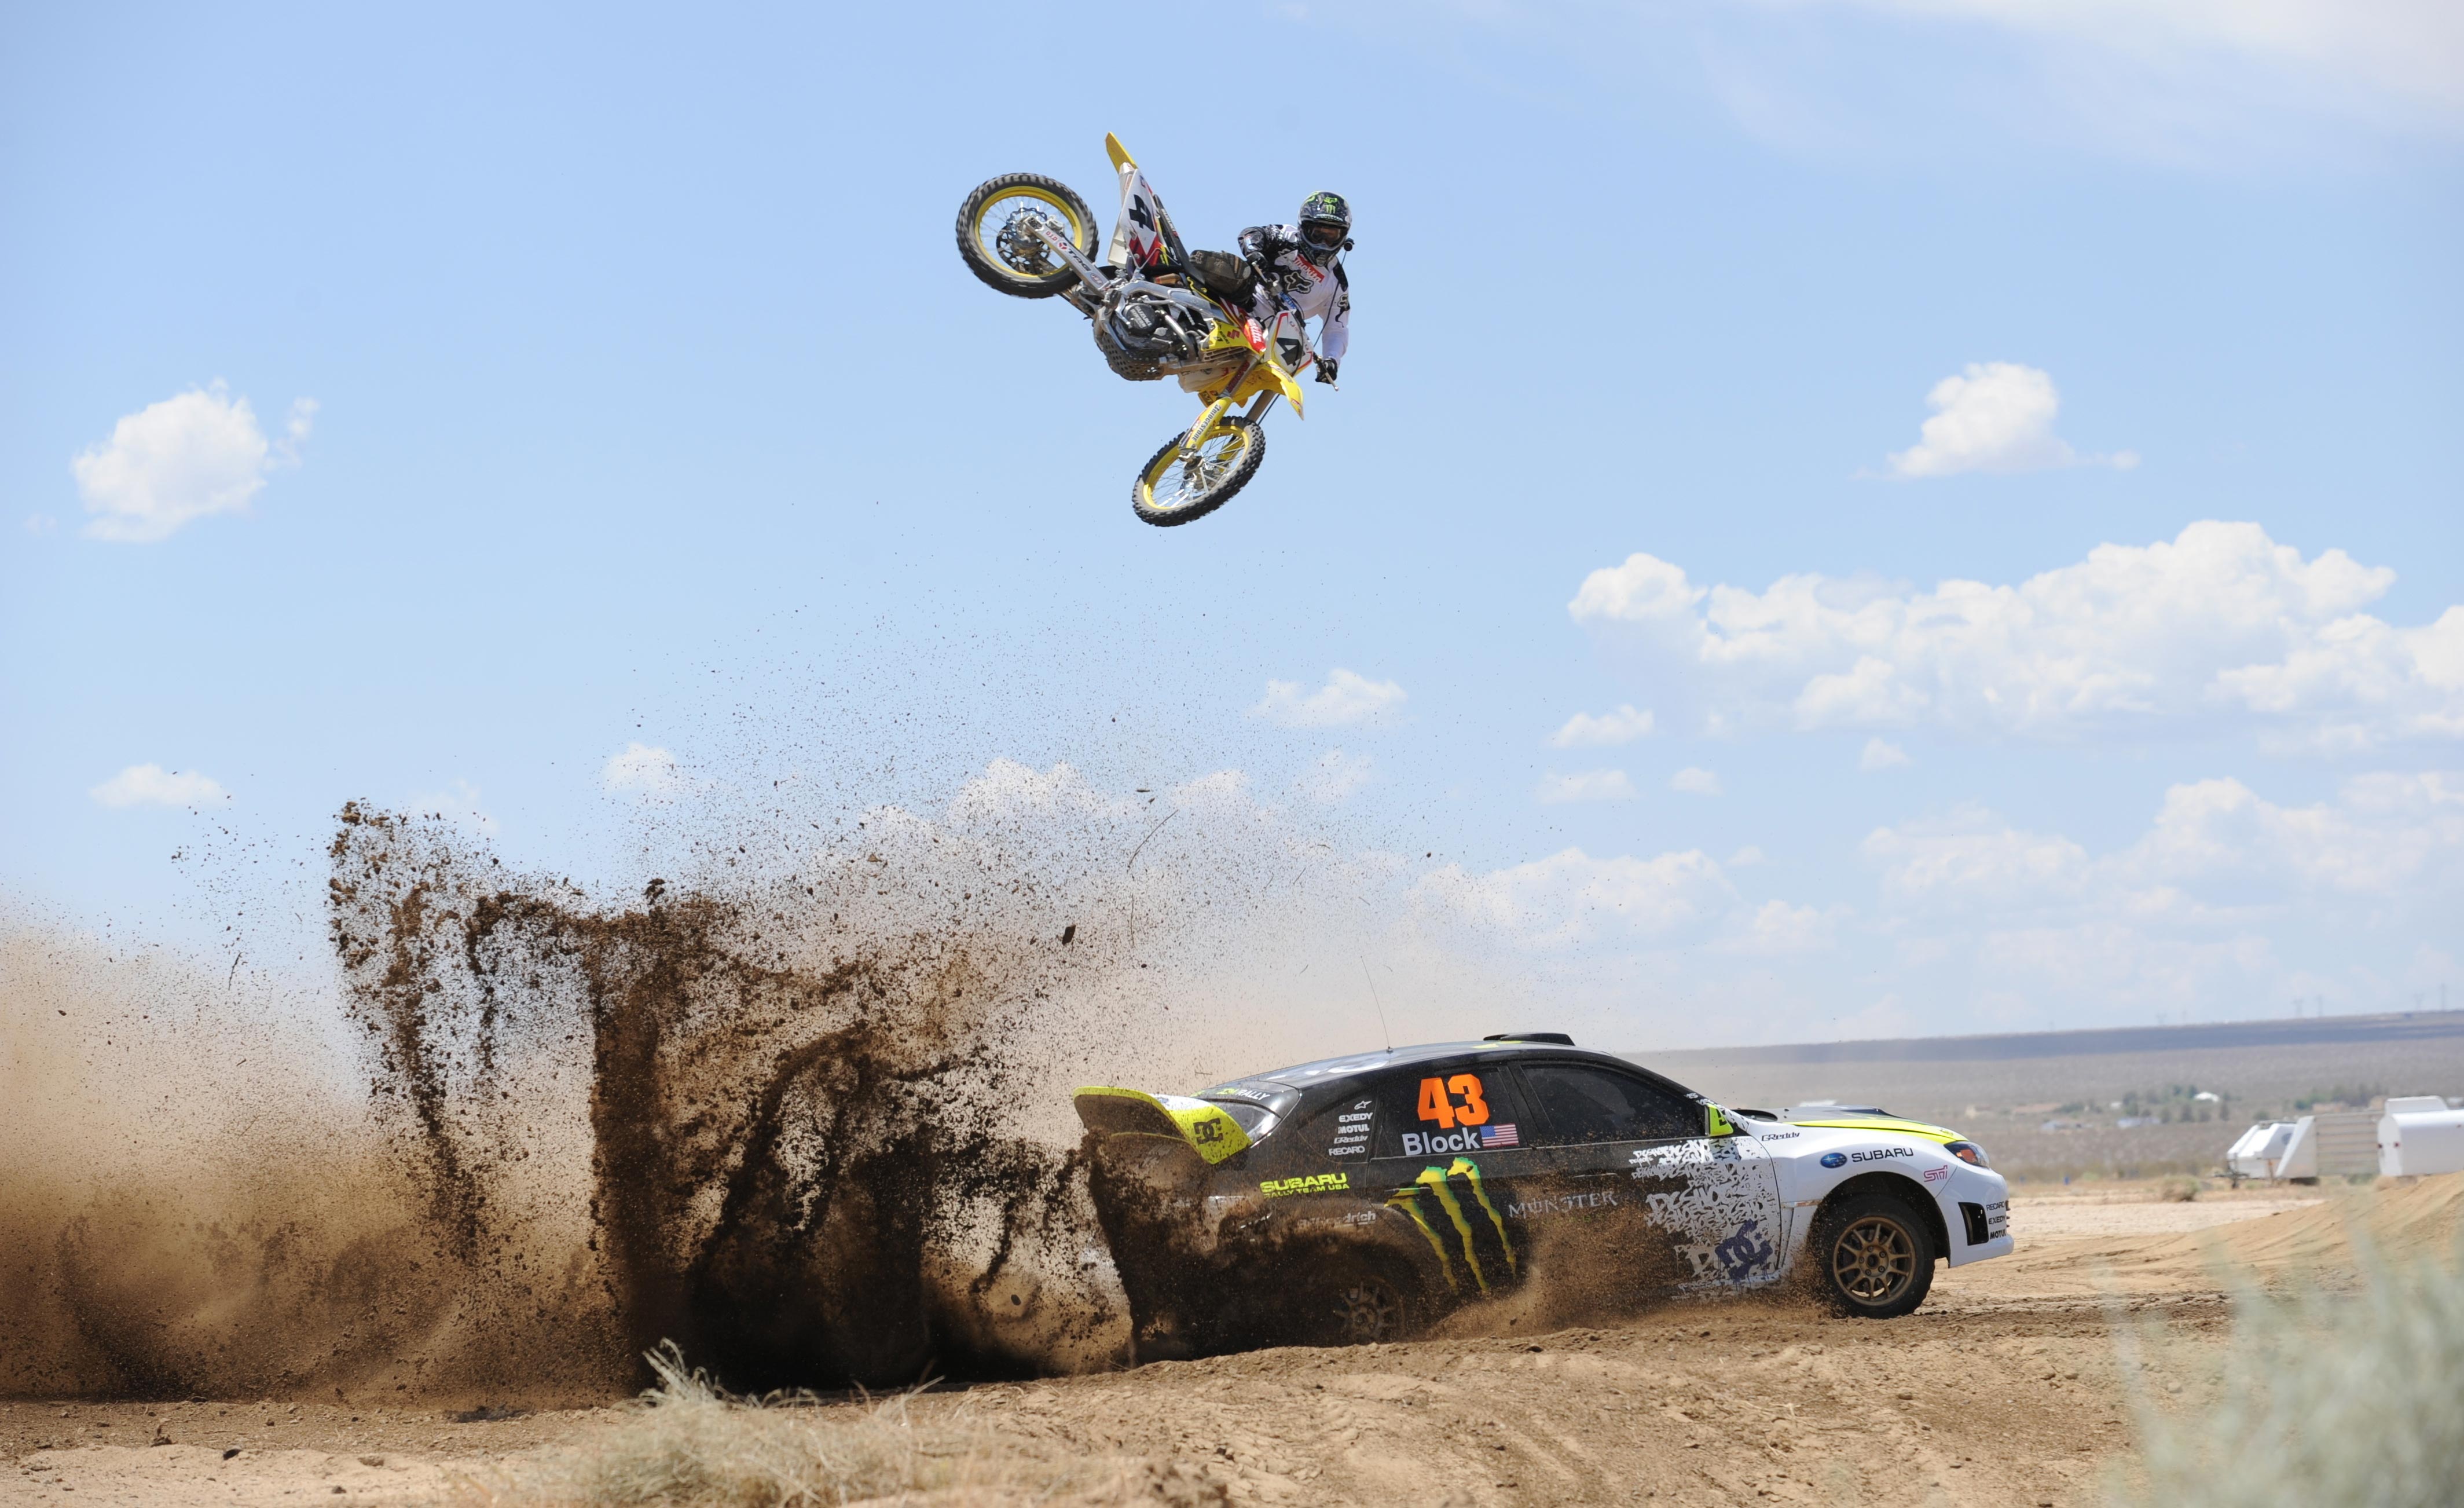 Pics For Gt Awesome Dirt Bike Wallpaper